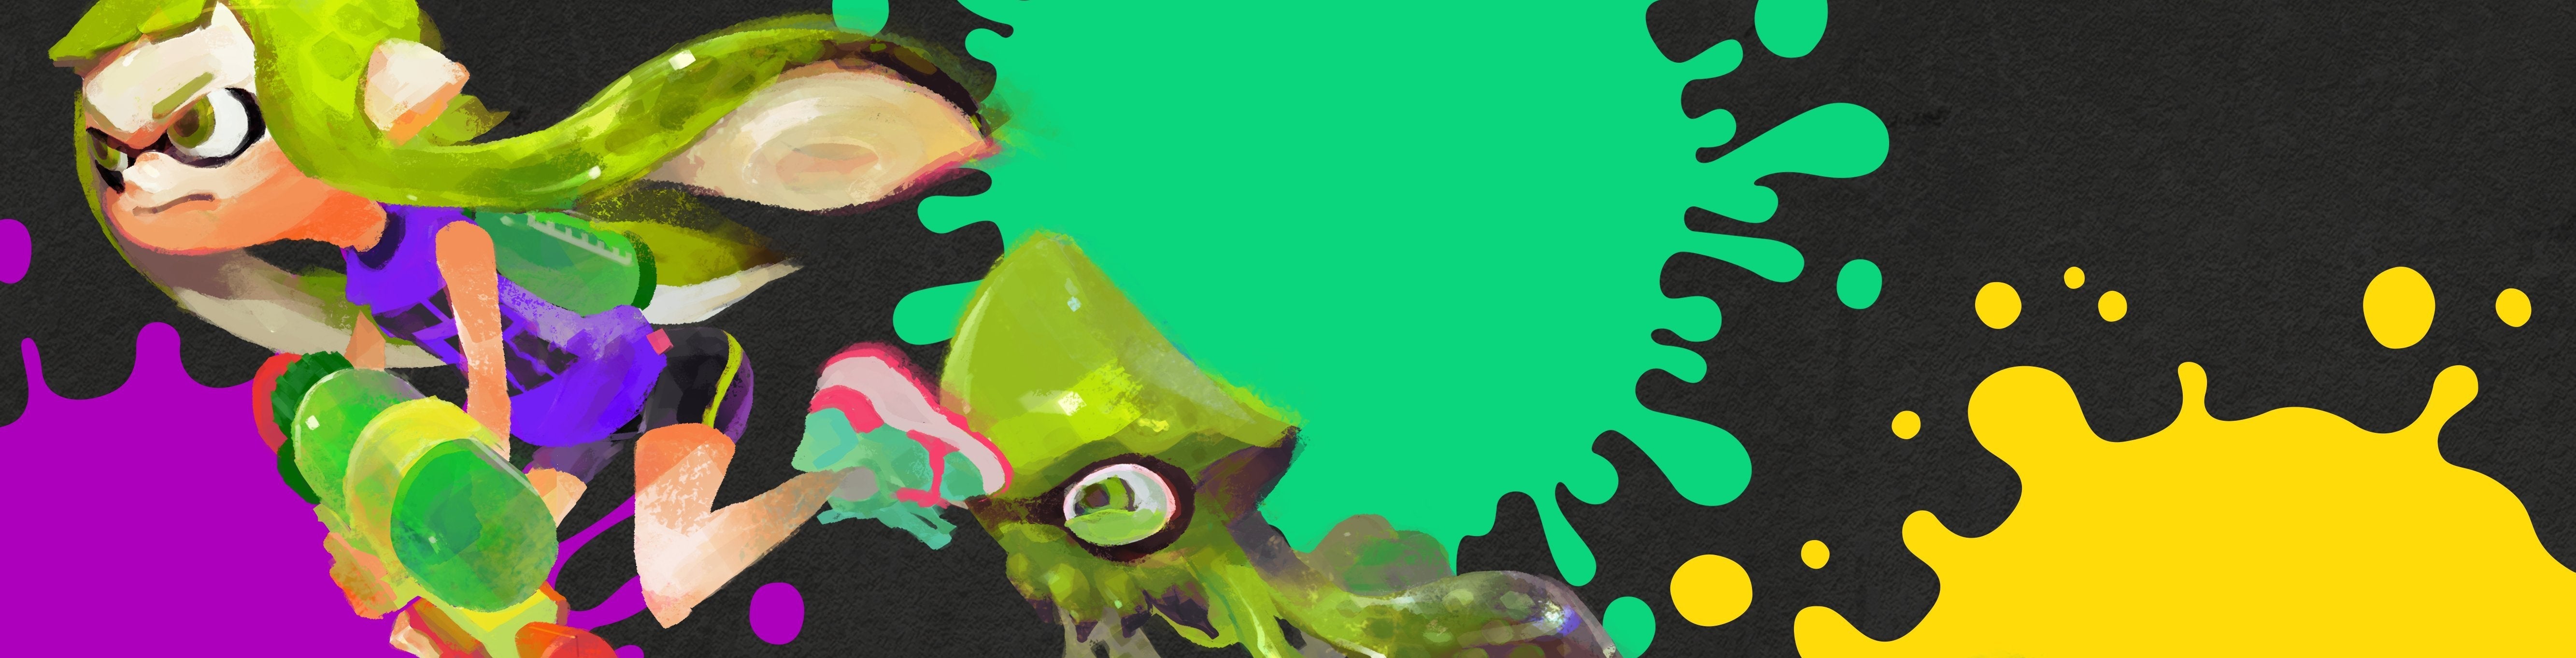 Image for How Nintendo is reinventing the shooter with Splatoon